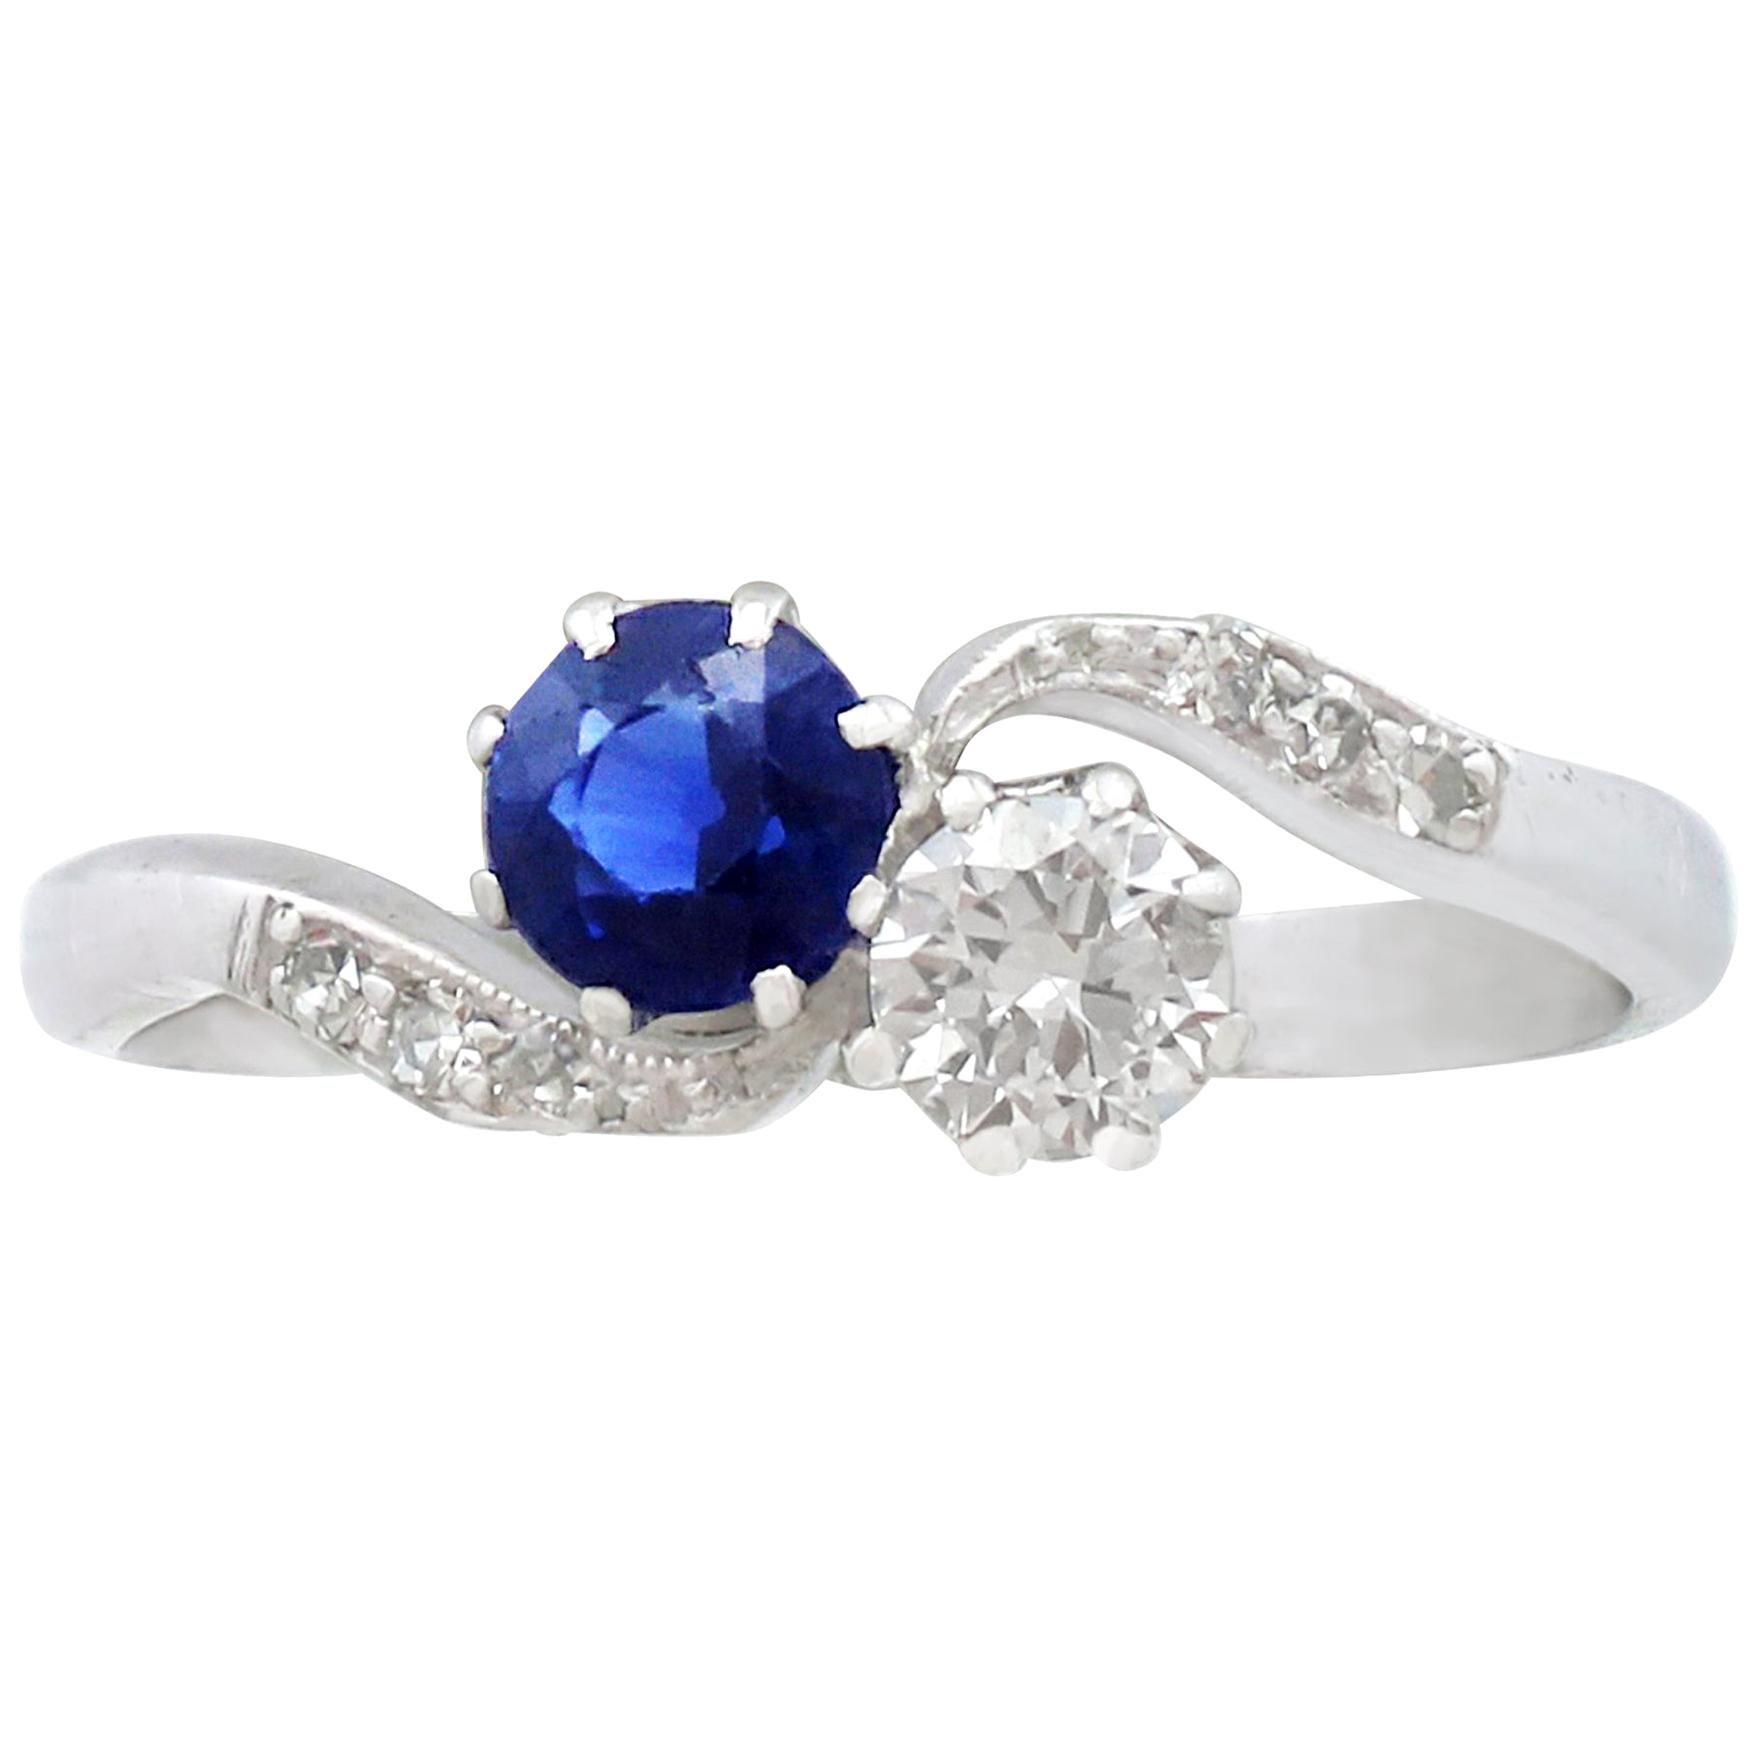 Antique 1920s Sapphire and Diamond White Gold Twist Ring